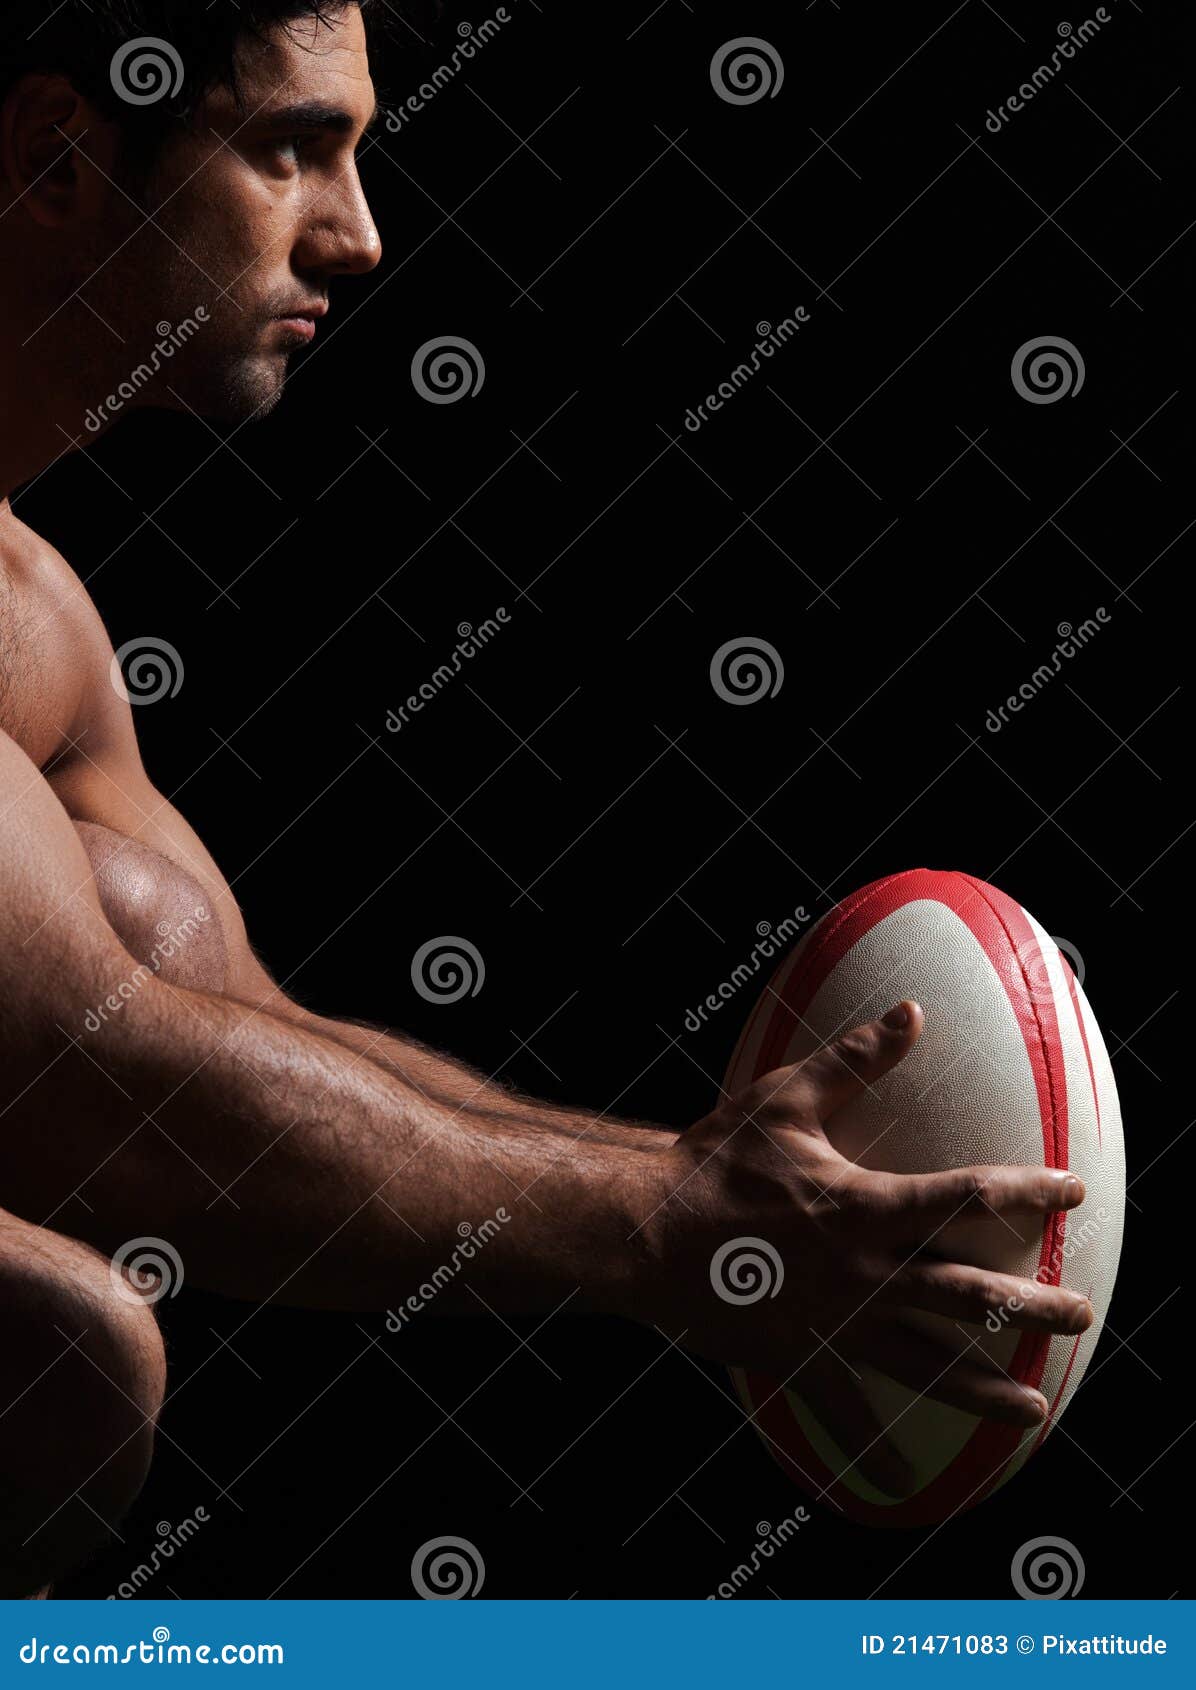 Score Big with These Naked Rugby Hunks